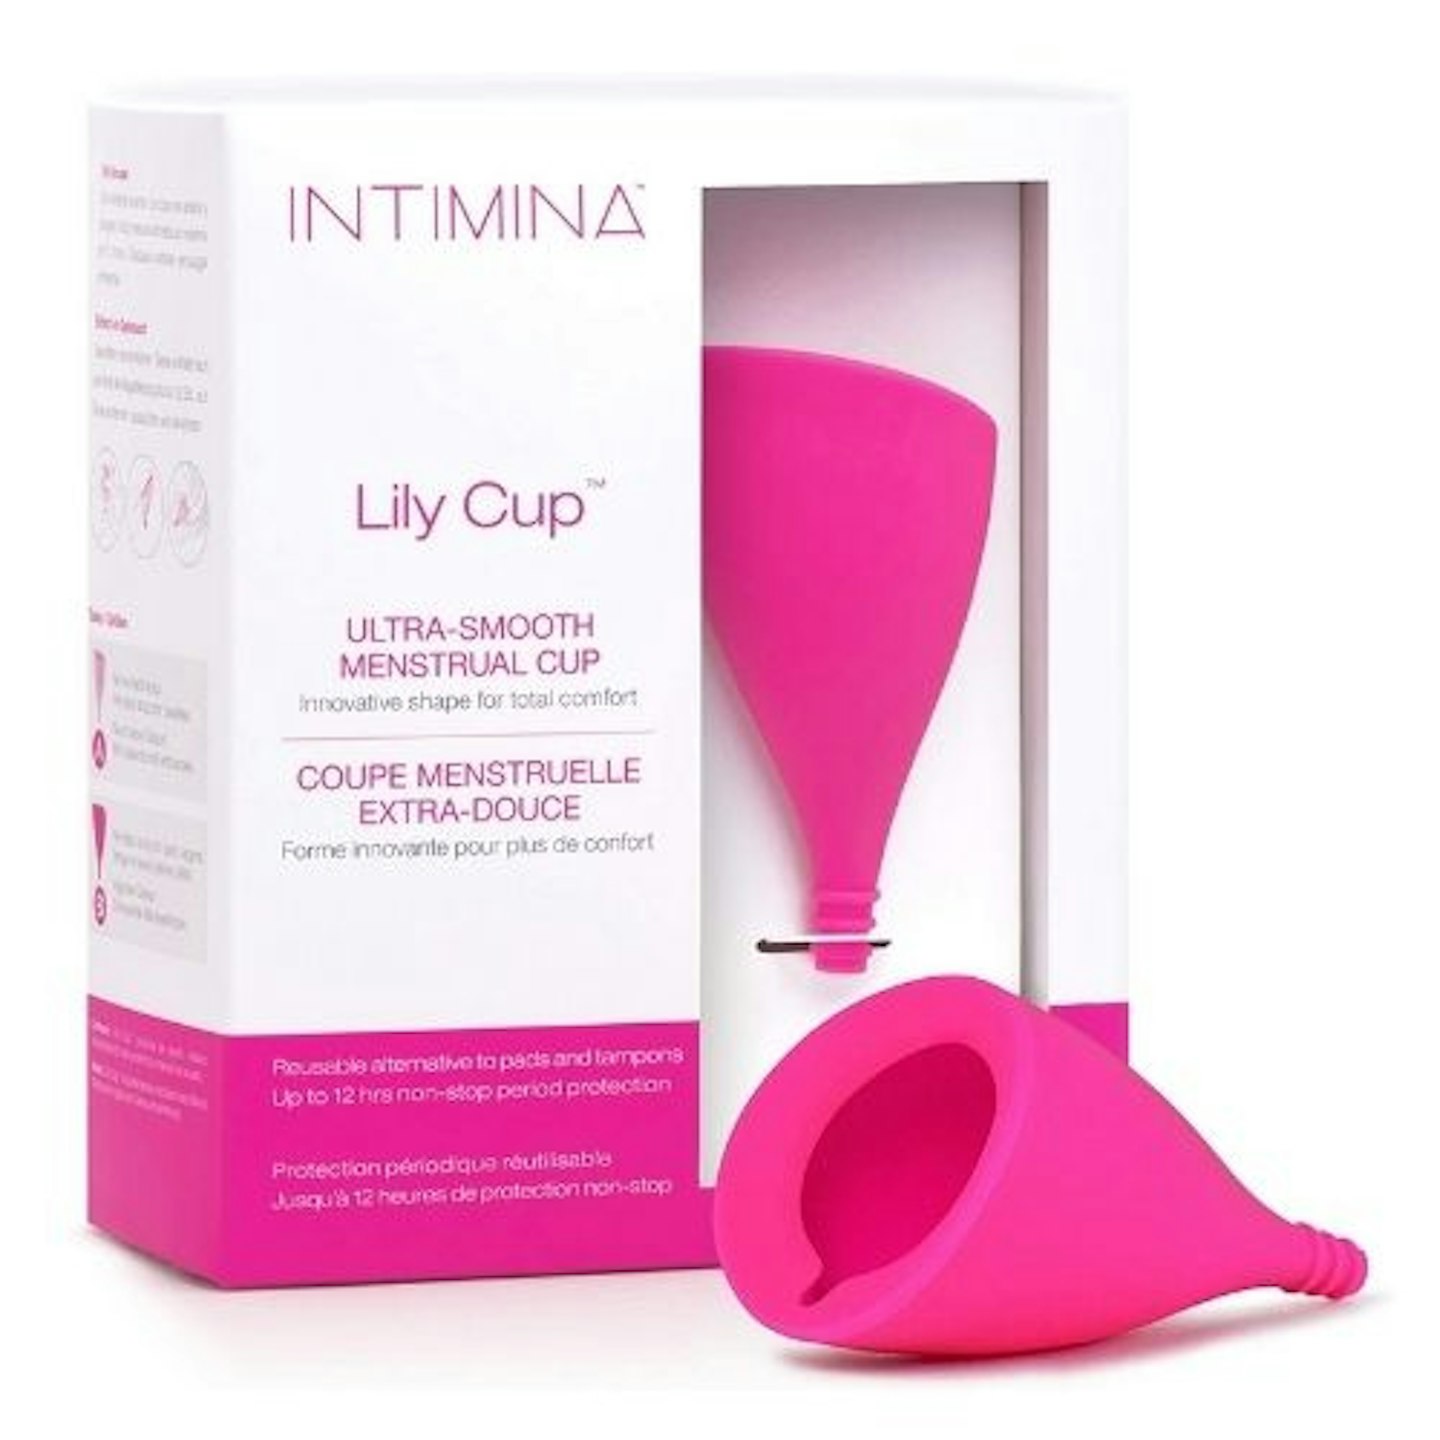 INTIMINA Lily Cup